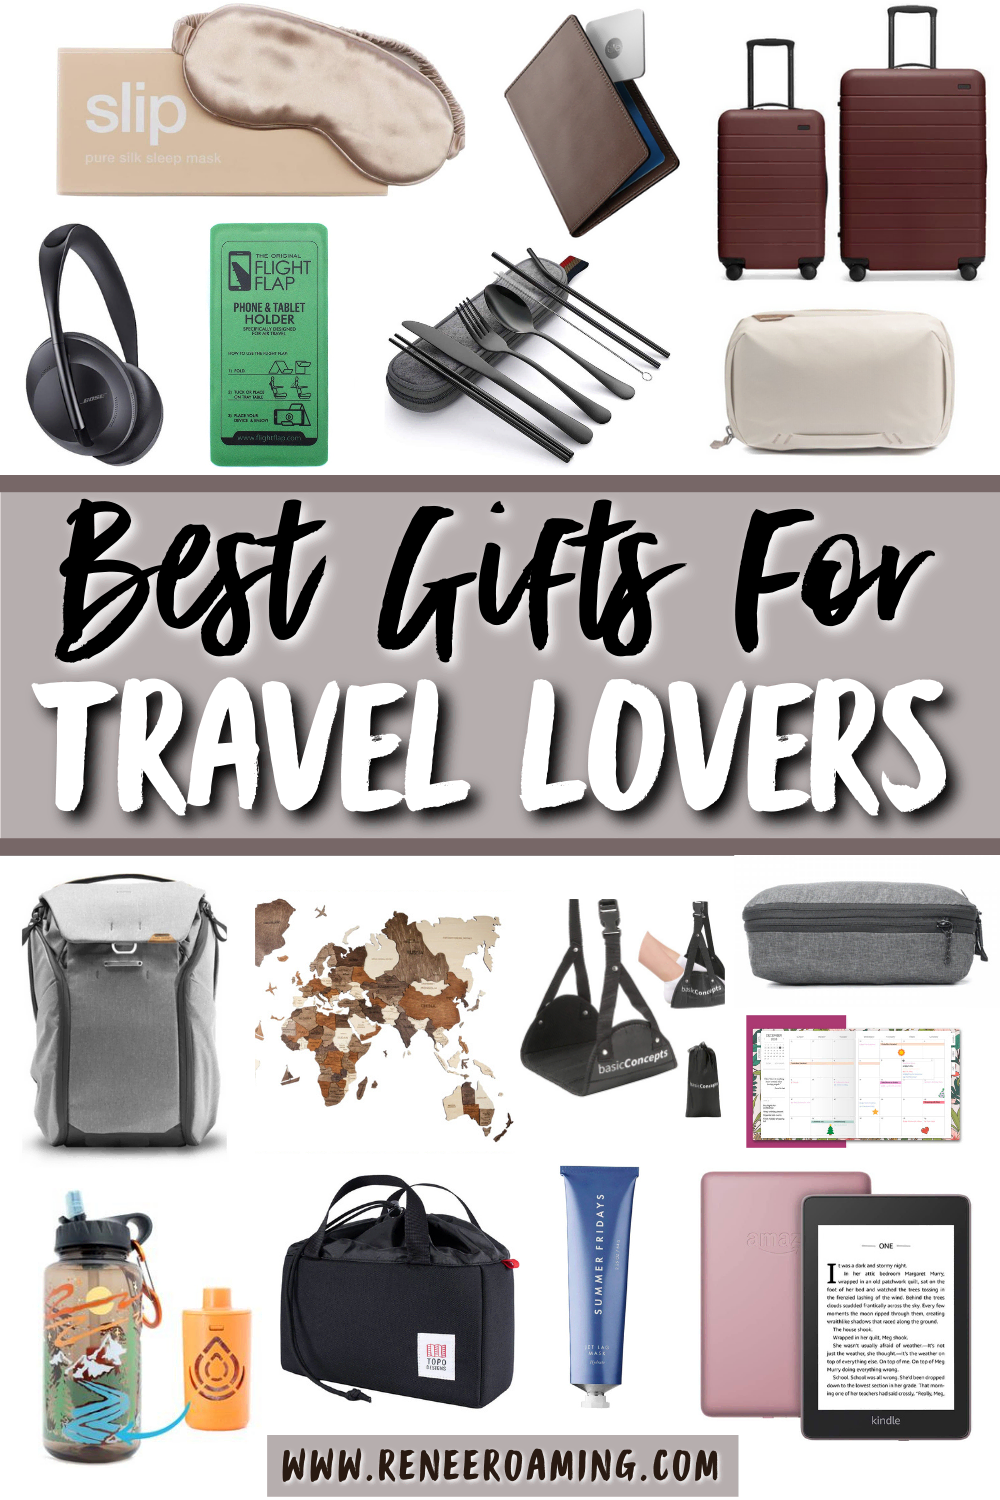 22 Best Gifts for Travel Lovers 2020